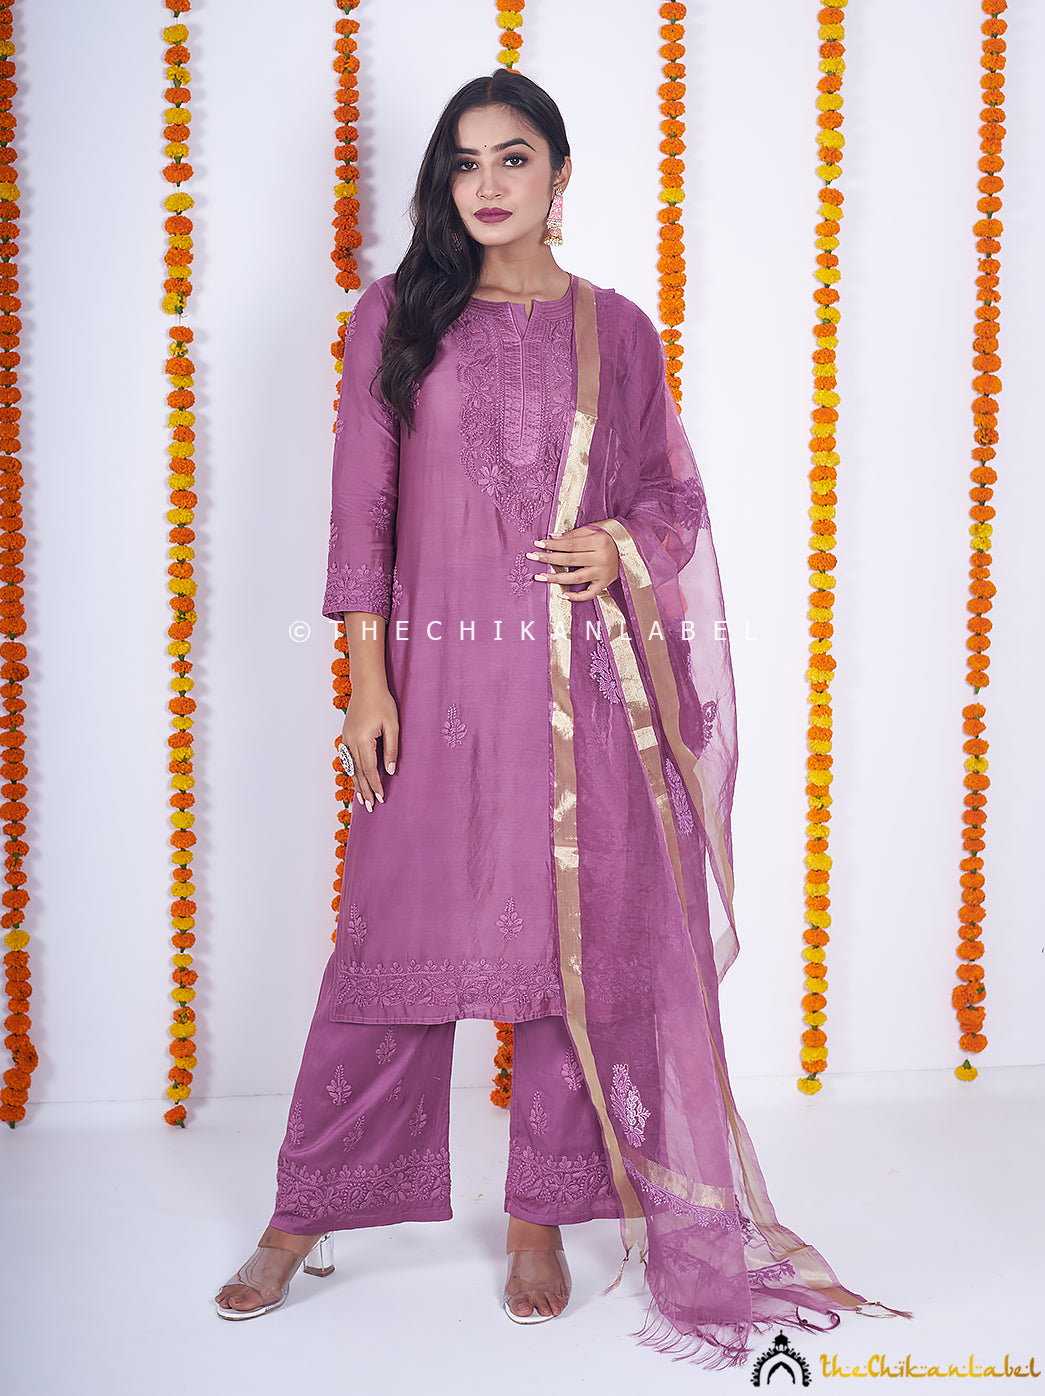 Buy chikankari kurti palazzo dupatta set online at best prices, Shop authentic Lucknow chikankari handmade kurta kurti palazzo dupatta set in chanderi fabric for women 